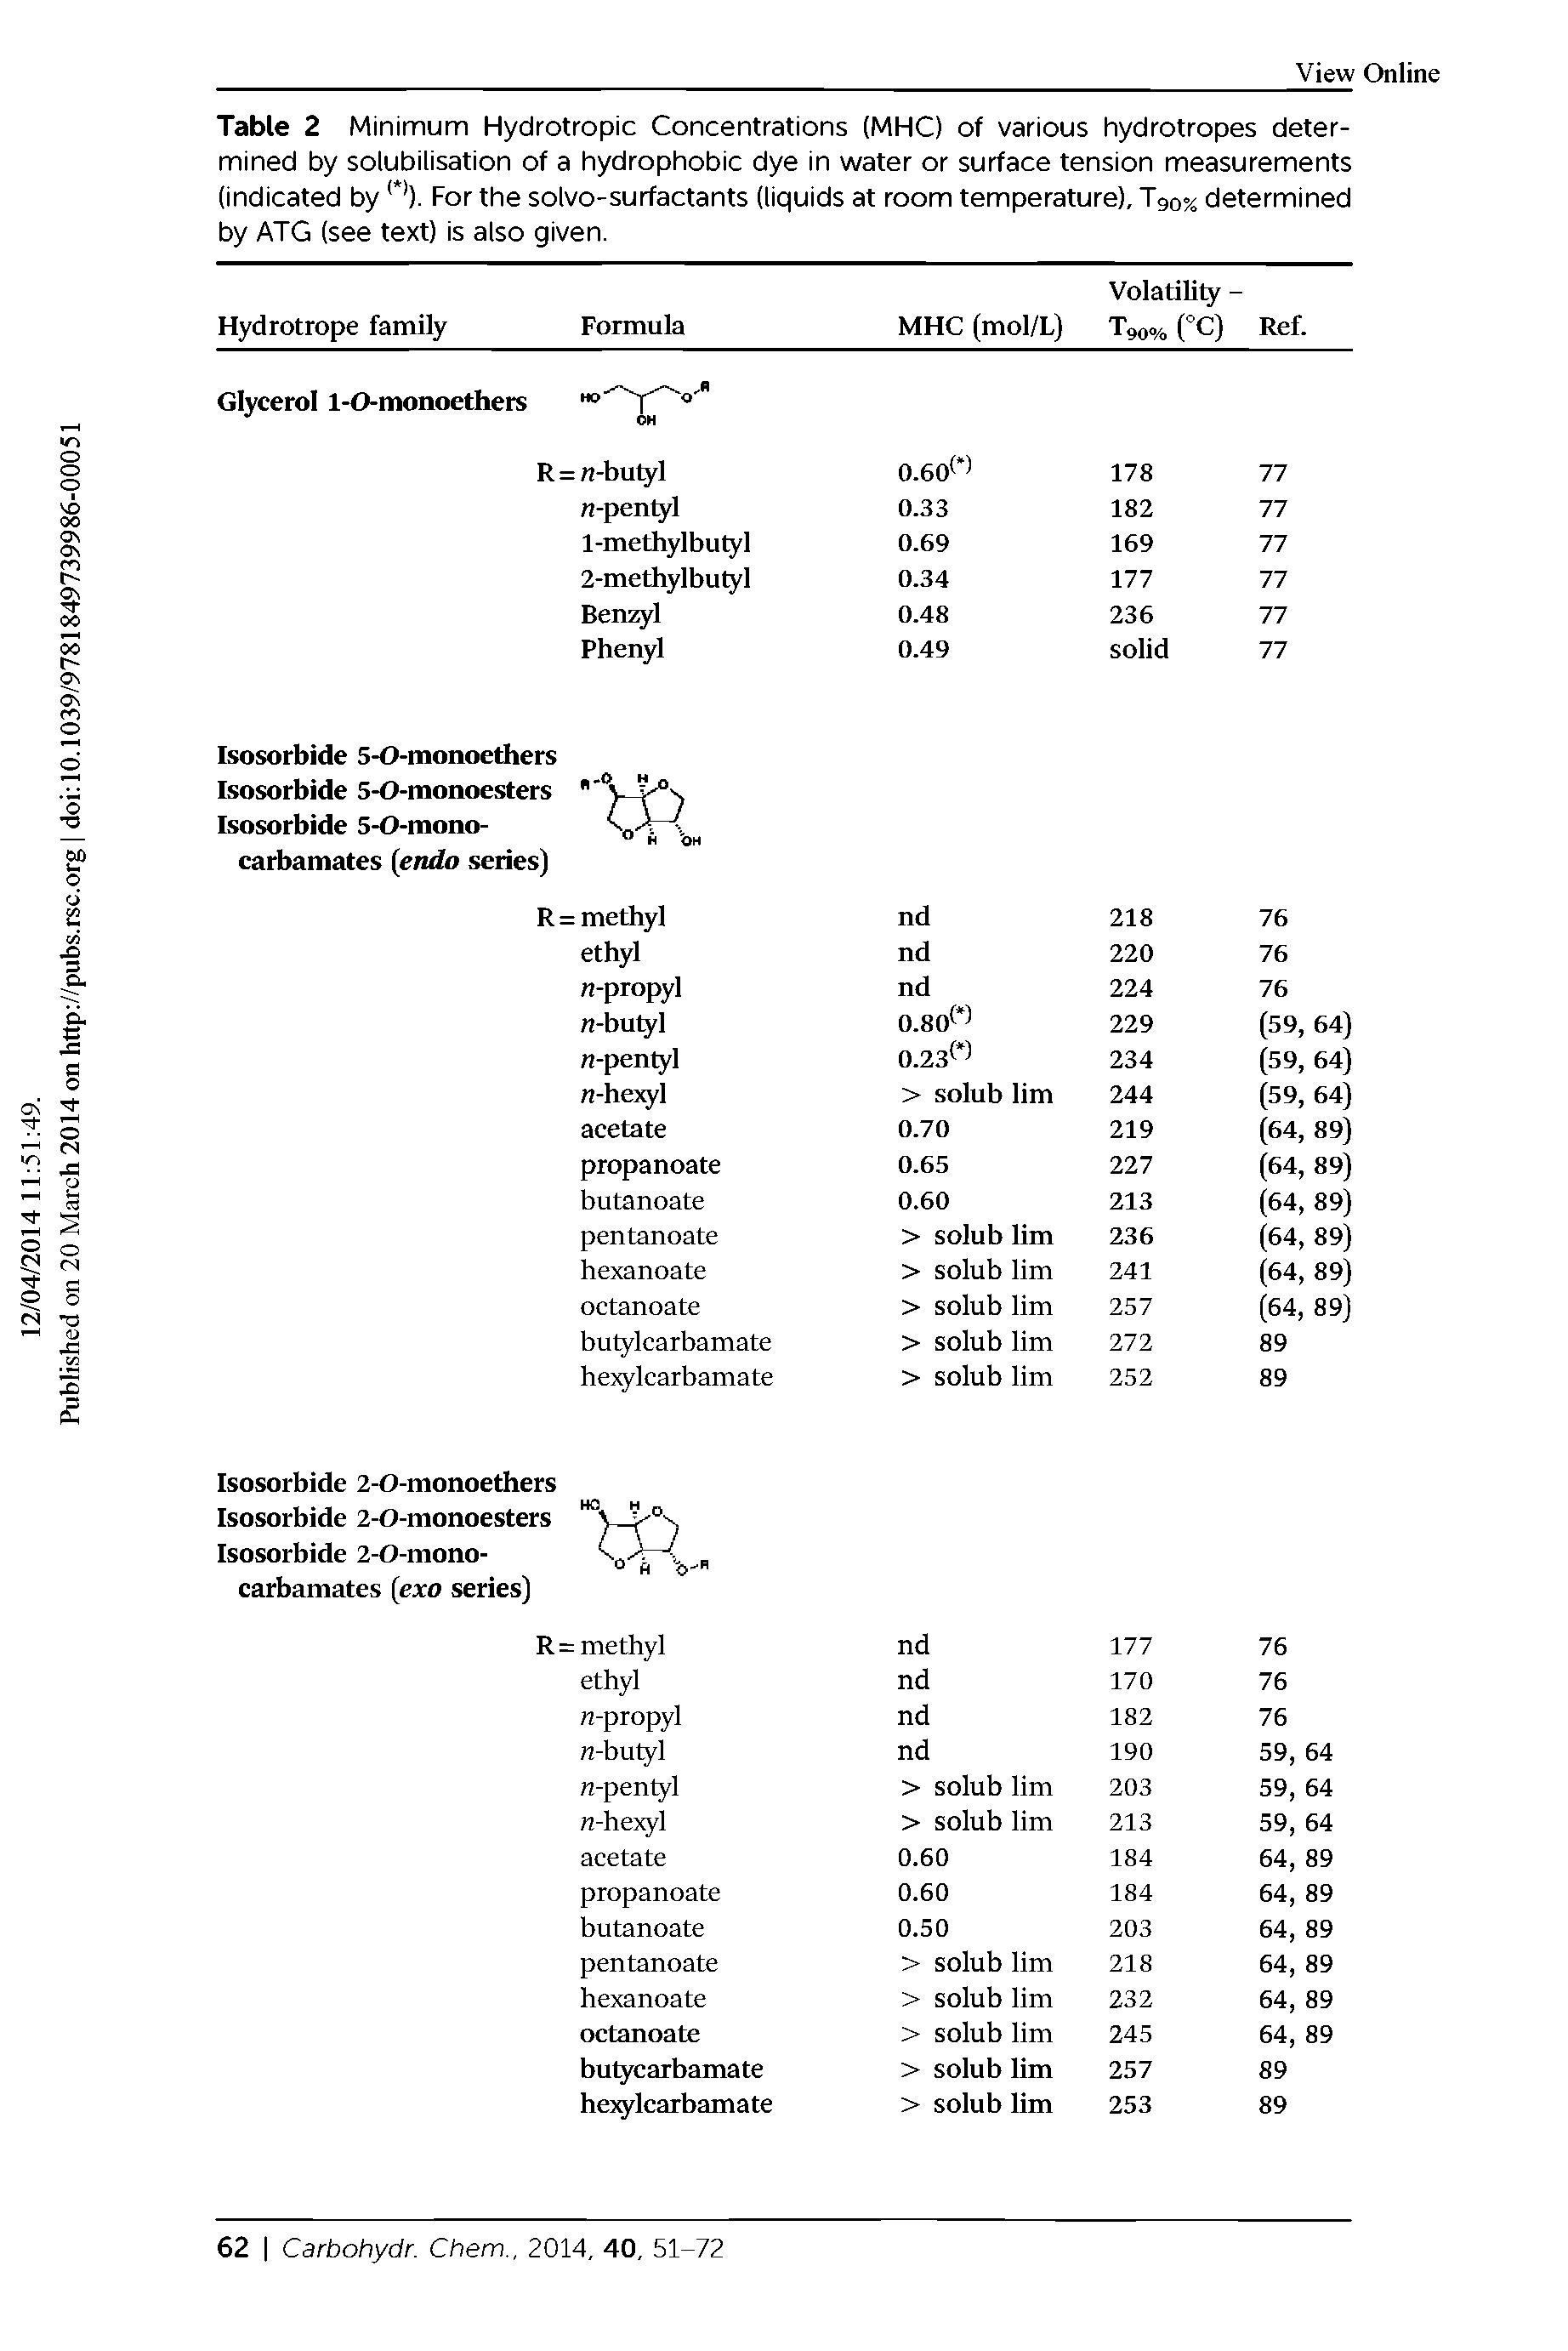 Table 2 Minimum Hydrotropic Concentrations (MHO of various hydrotropes determined by solubilisation of a hydrophobic dye in water or surface tension measurements (indicated by ). For the solvo-surfactants (liquids at room temperature), T9o% determined by ATG (see text) is also given. ...